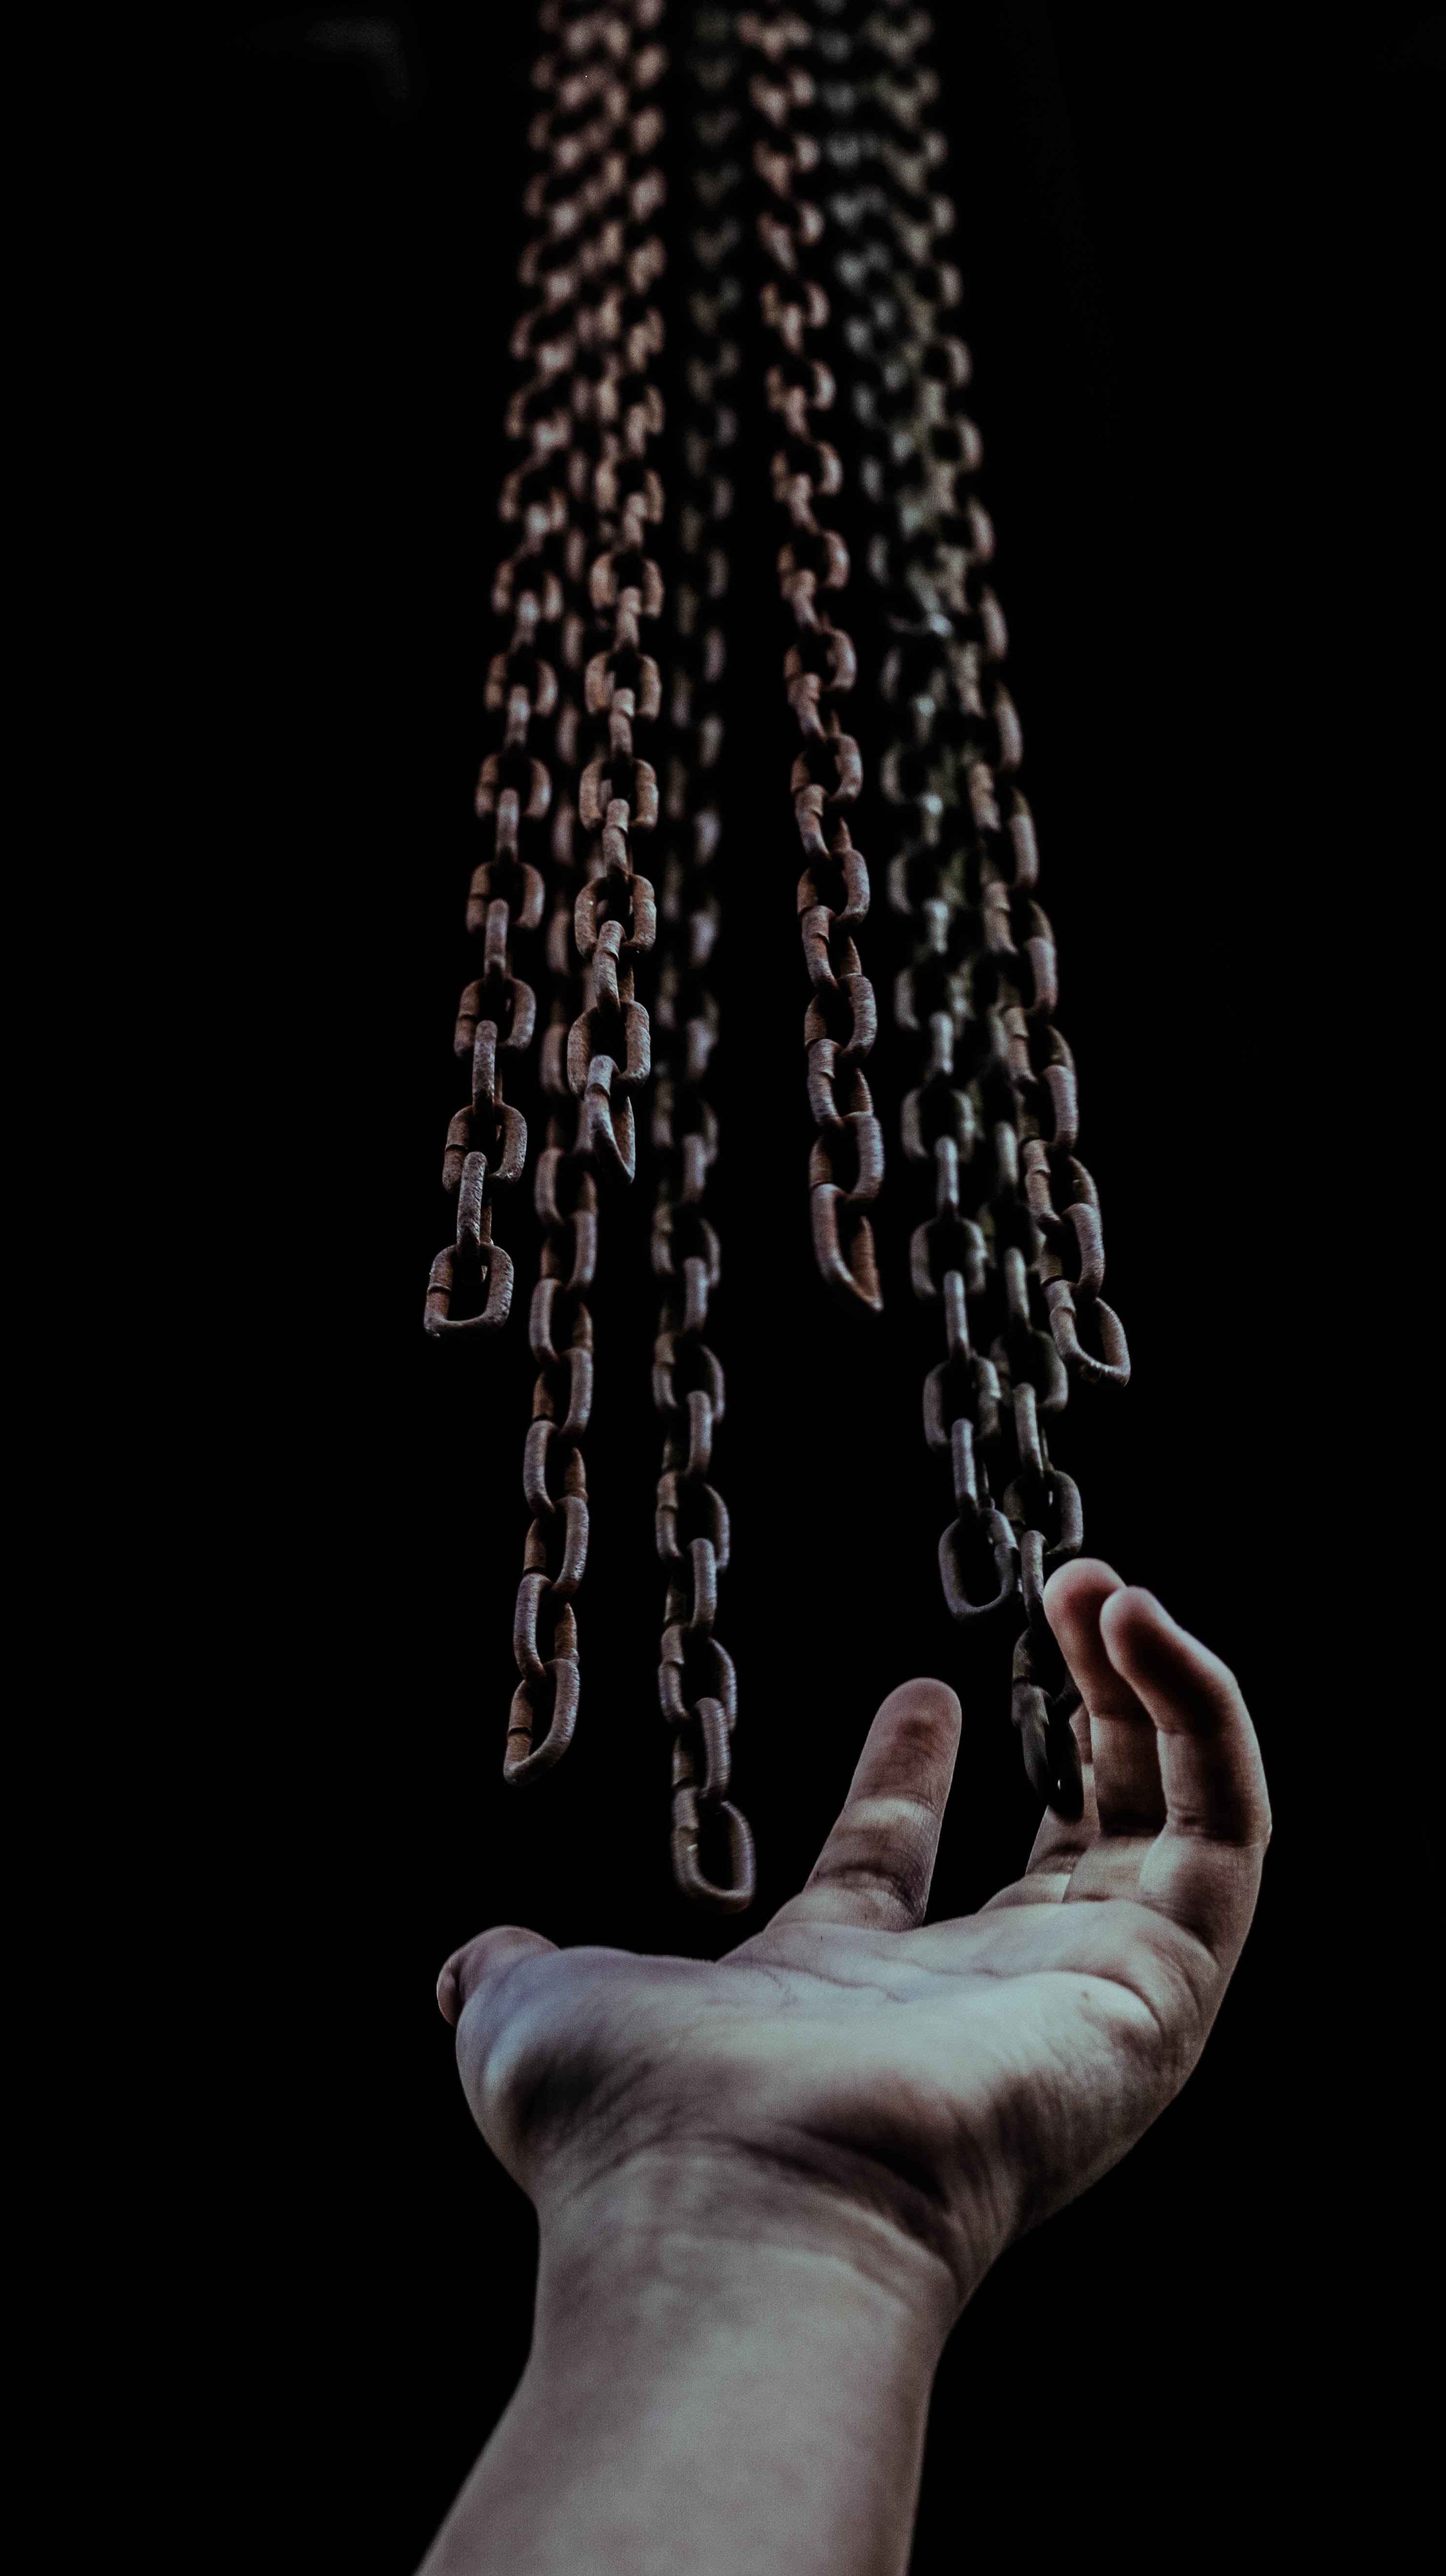 picture of a hand open with the palm towards a series of chains coming from the top of the image, over a black background 